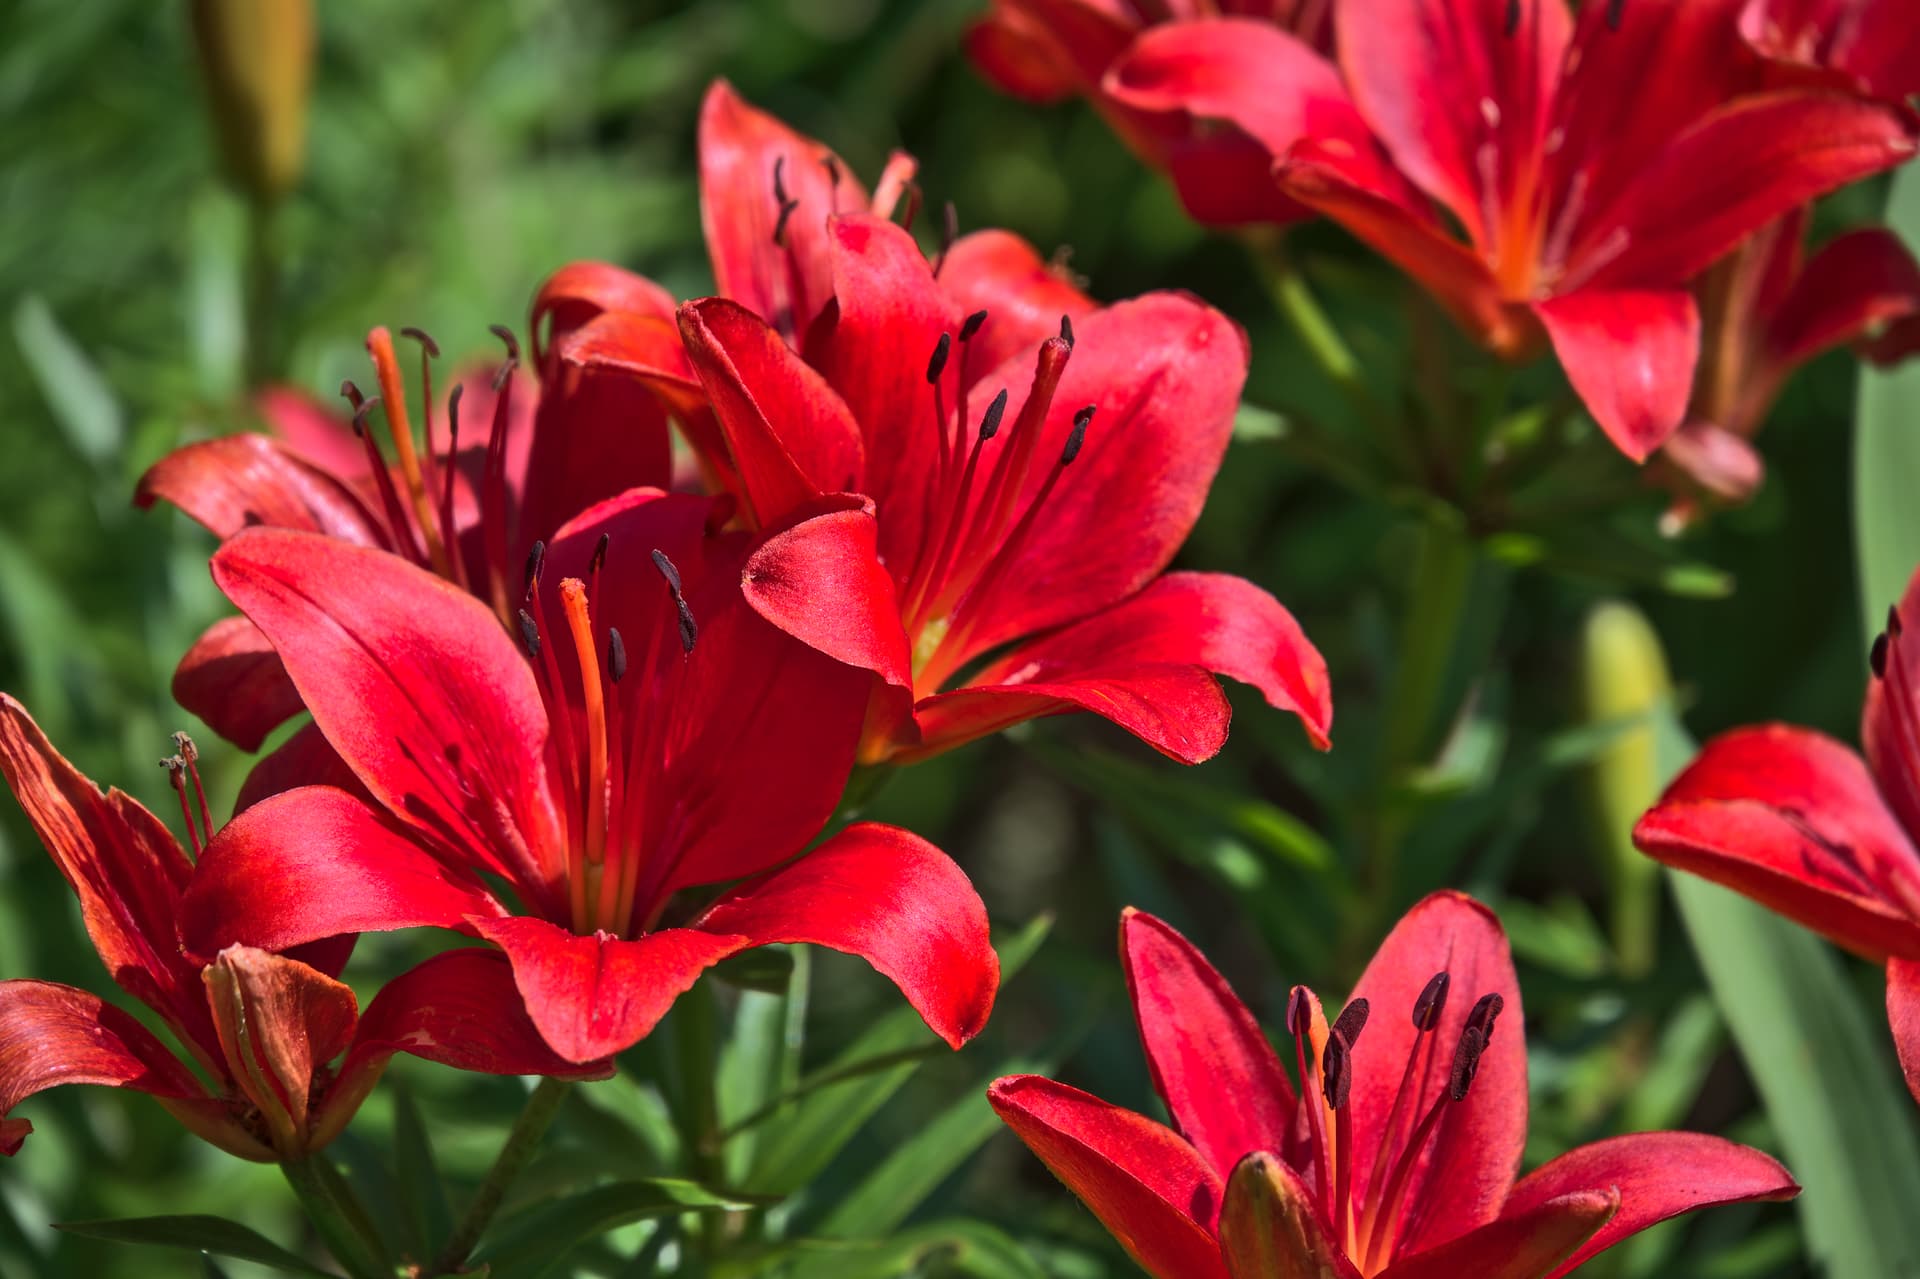 A JPEG image of some red flowers